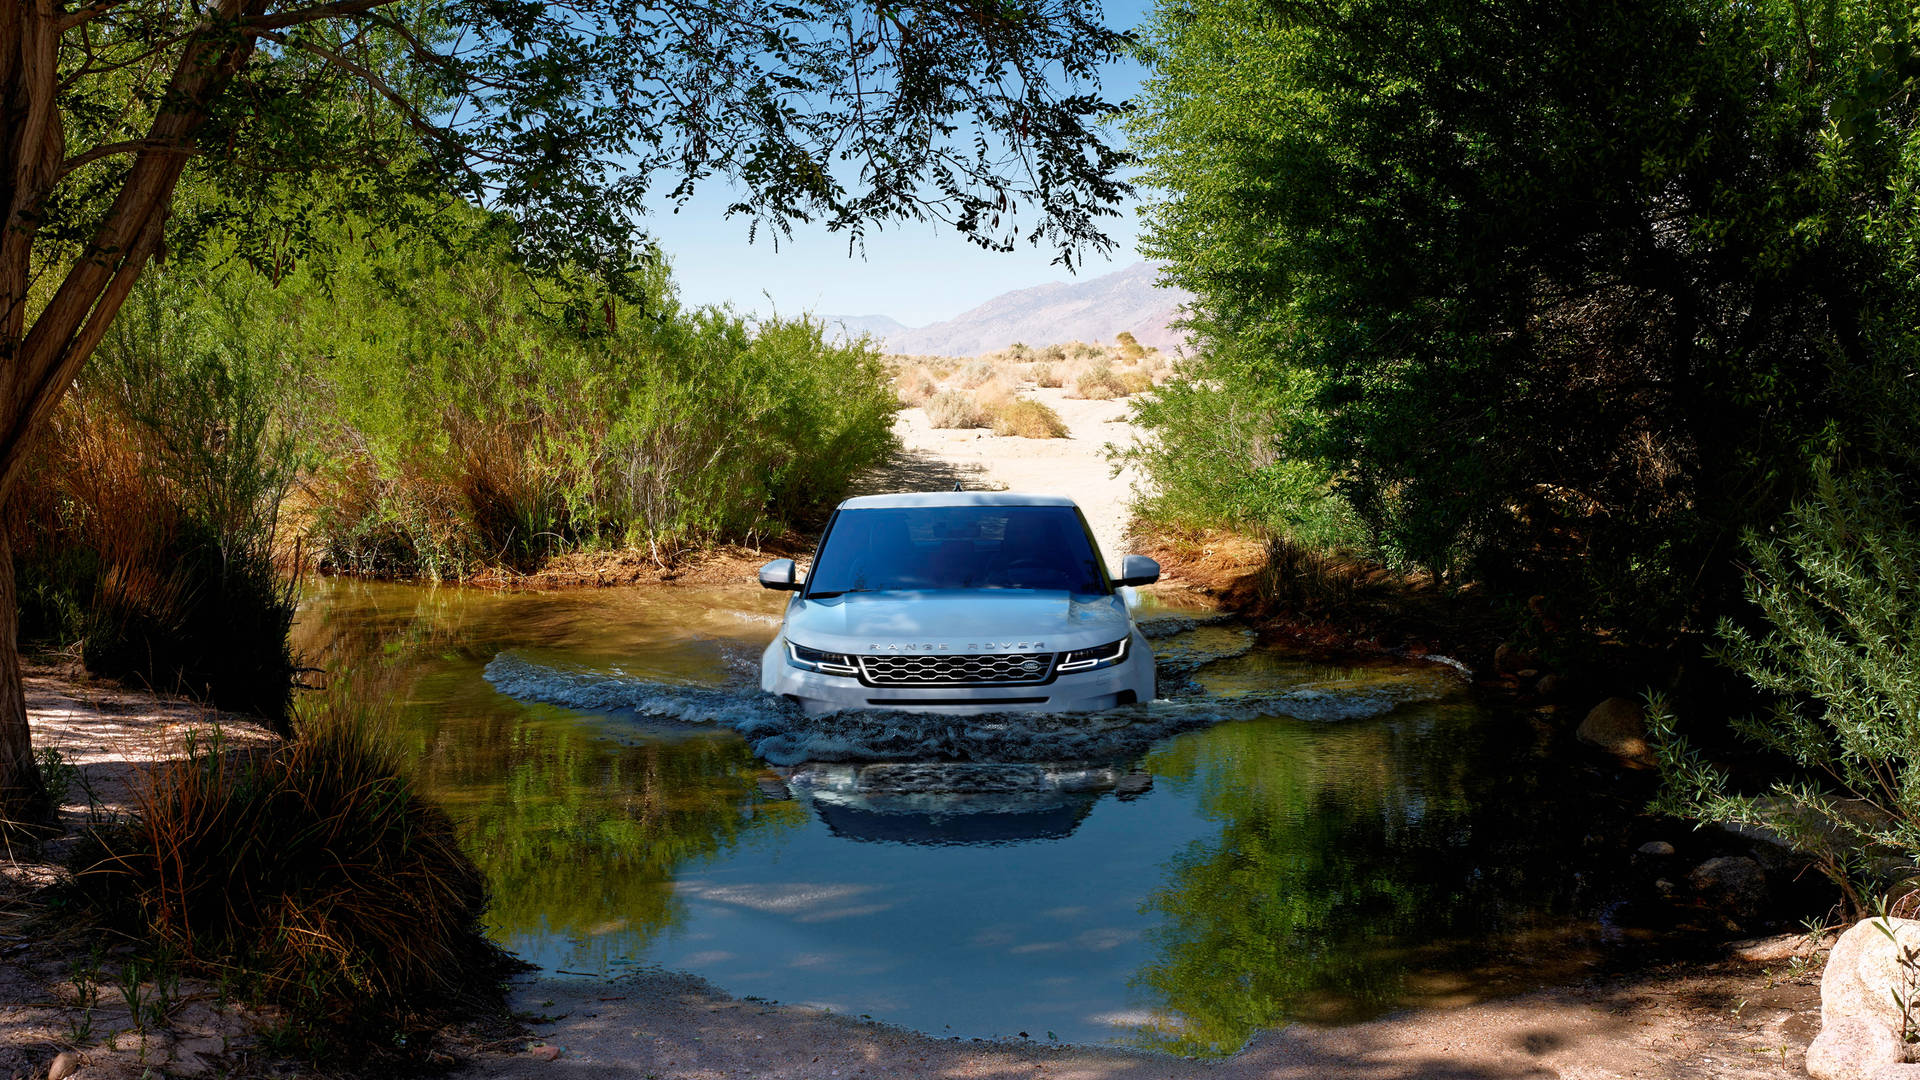 4krange Rover Forest In Italian Could Be Translated As 